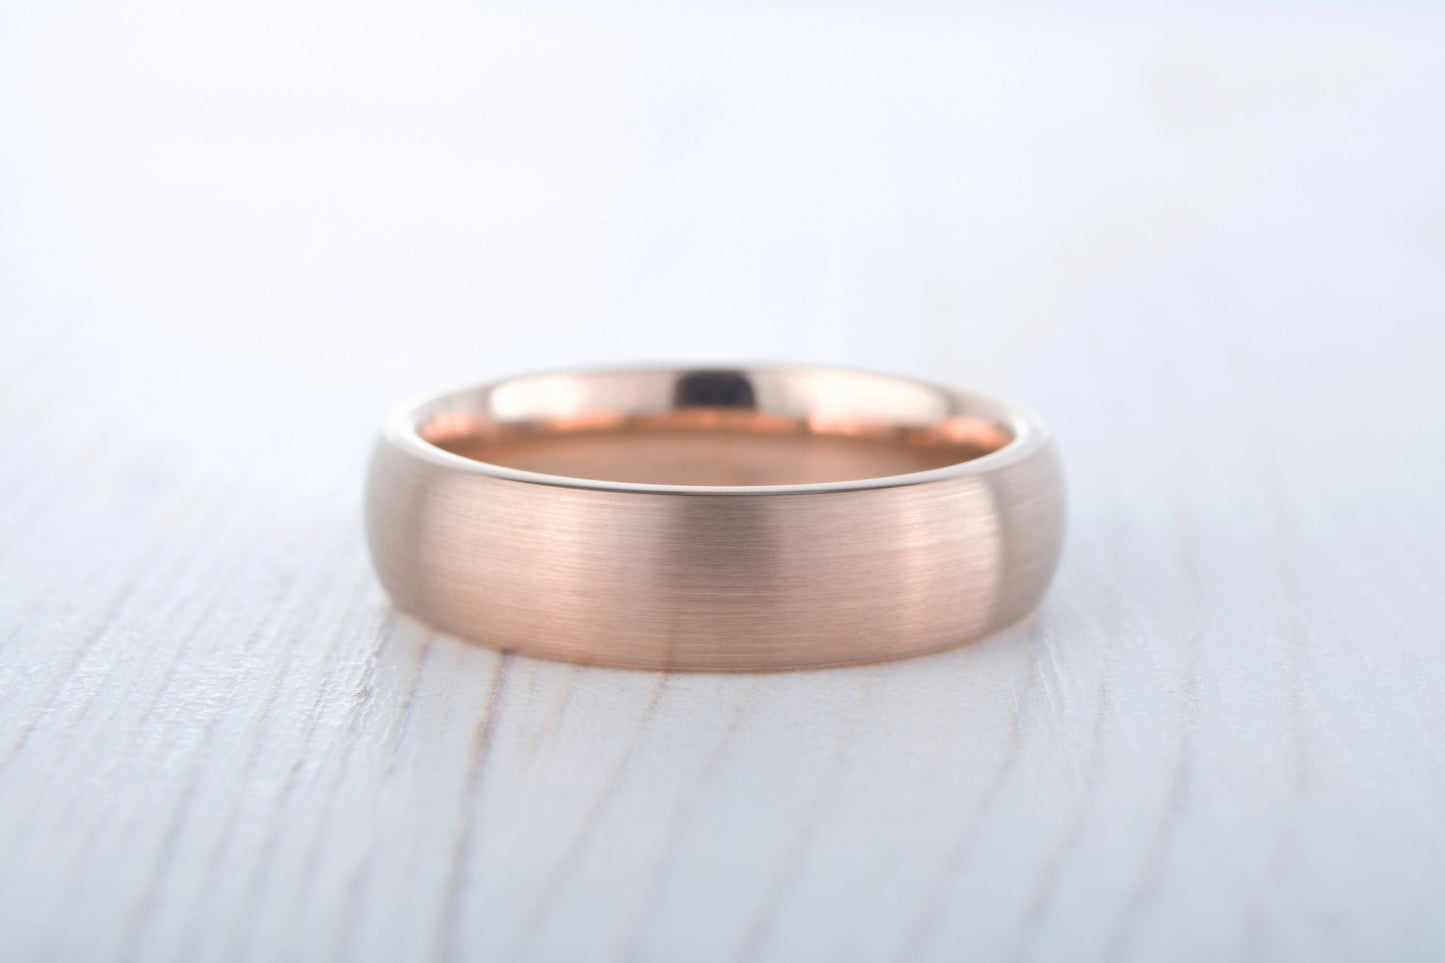 6mm 14K Rose Gold and Brushed Titanium Wedding ring band for men and women